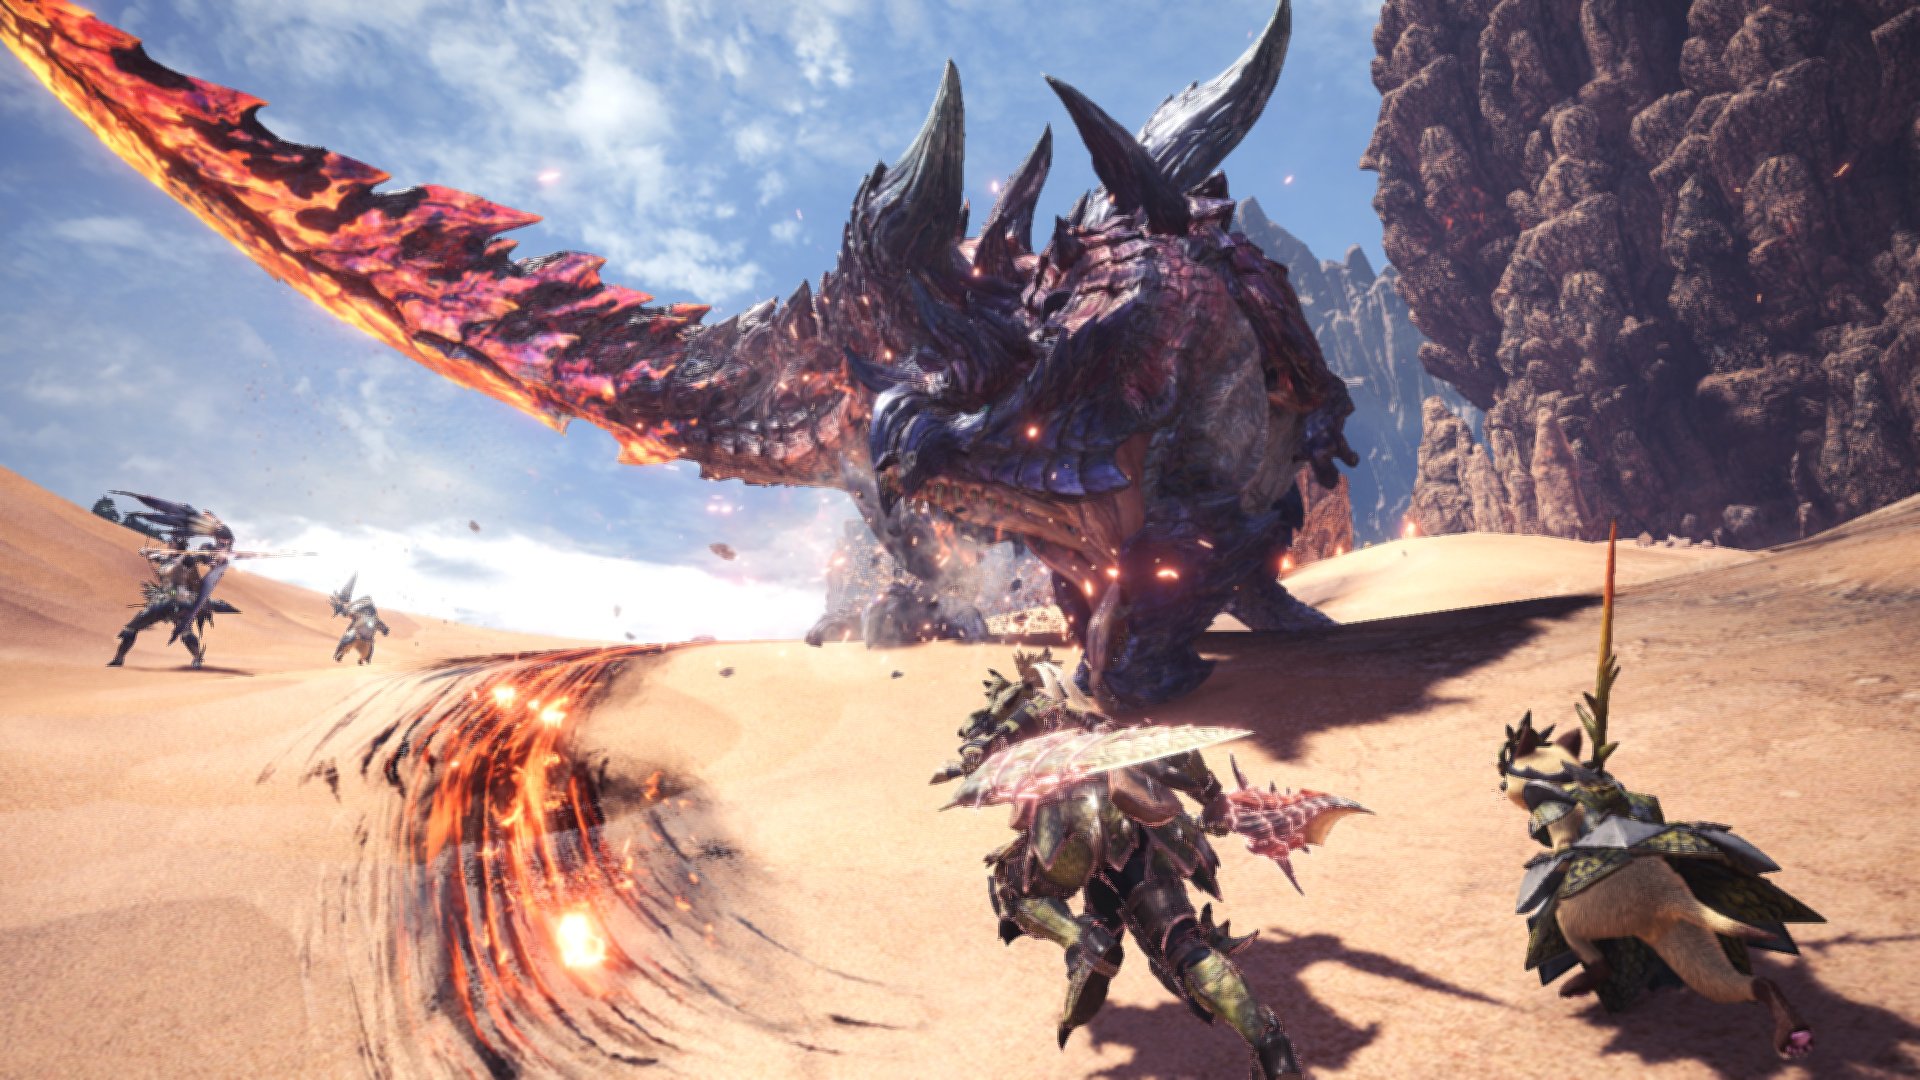 The Best Tips and Tricks for Hunting in Monster Hunter Now